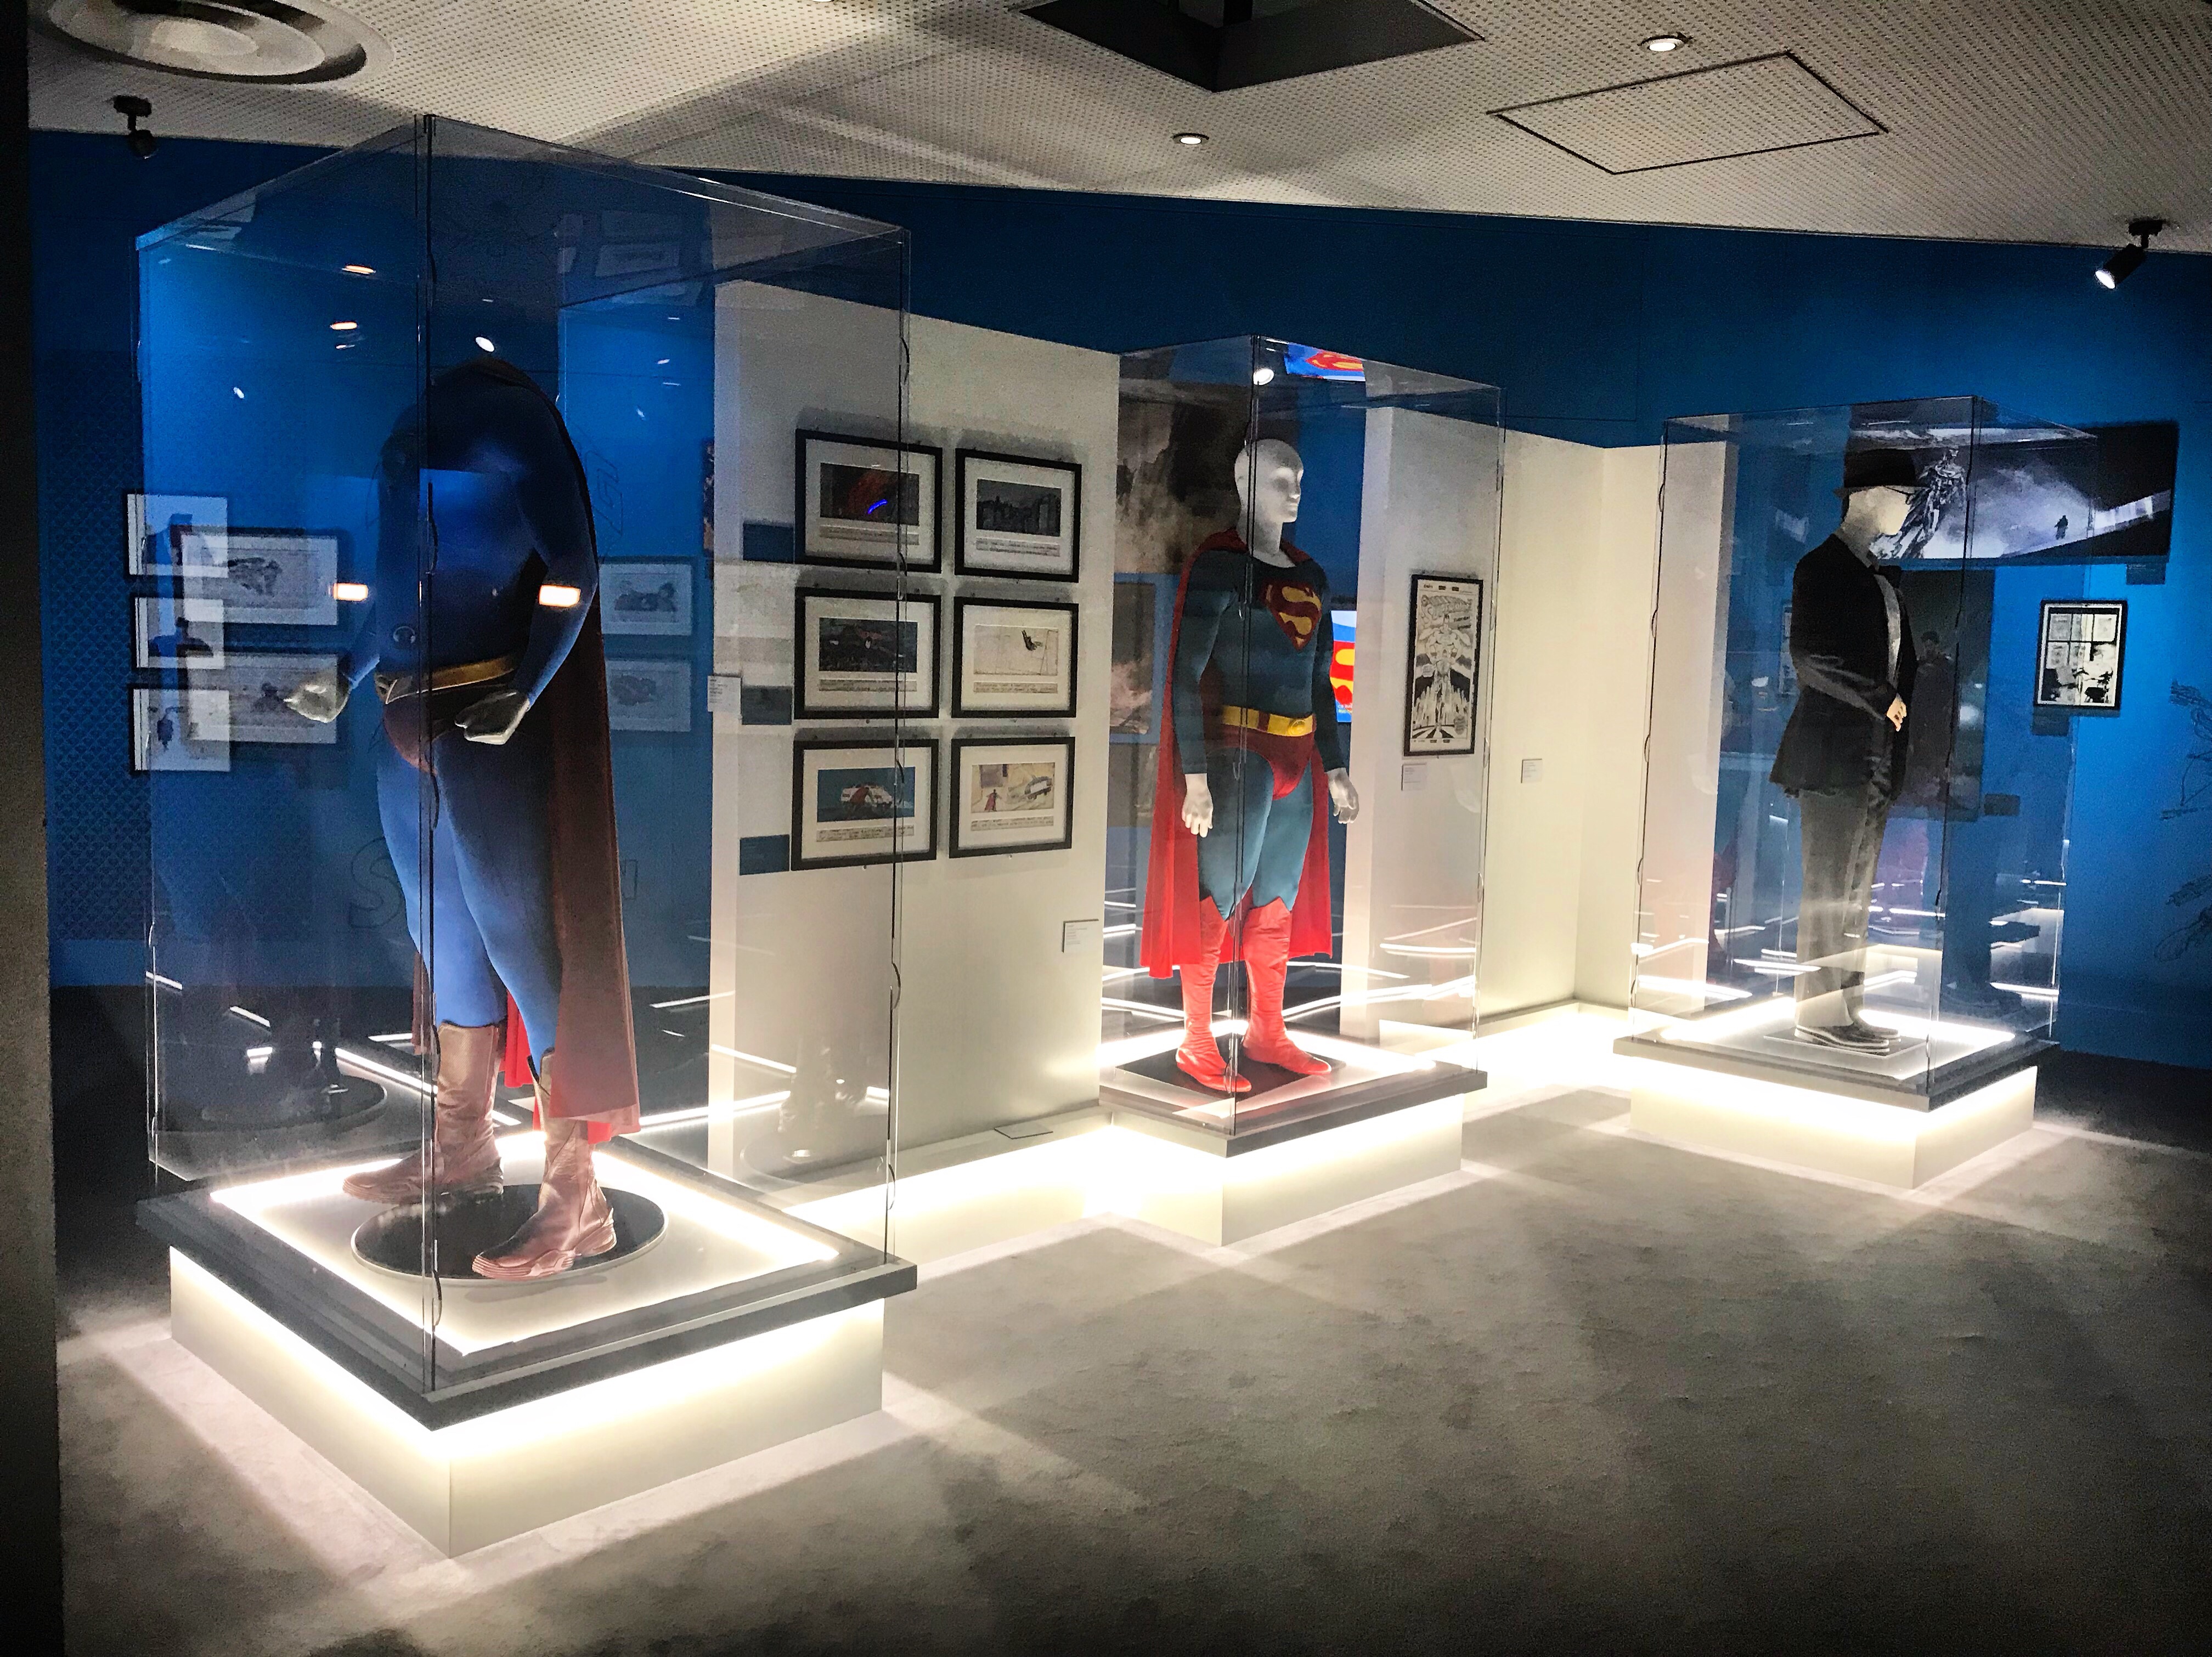 Superman Costumes - Superman The Movie and Superman Returns, worn by Christopher Reeve and Brandon Routh